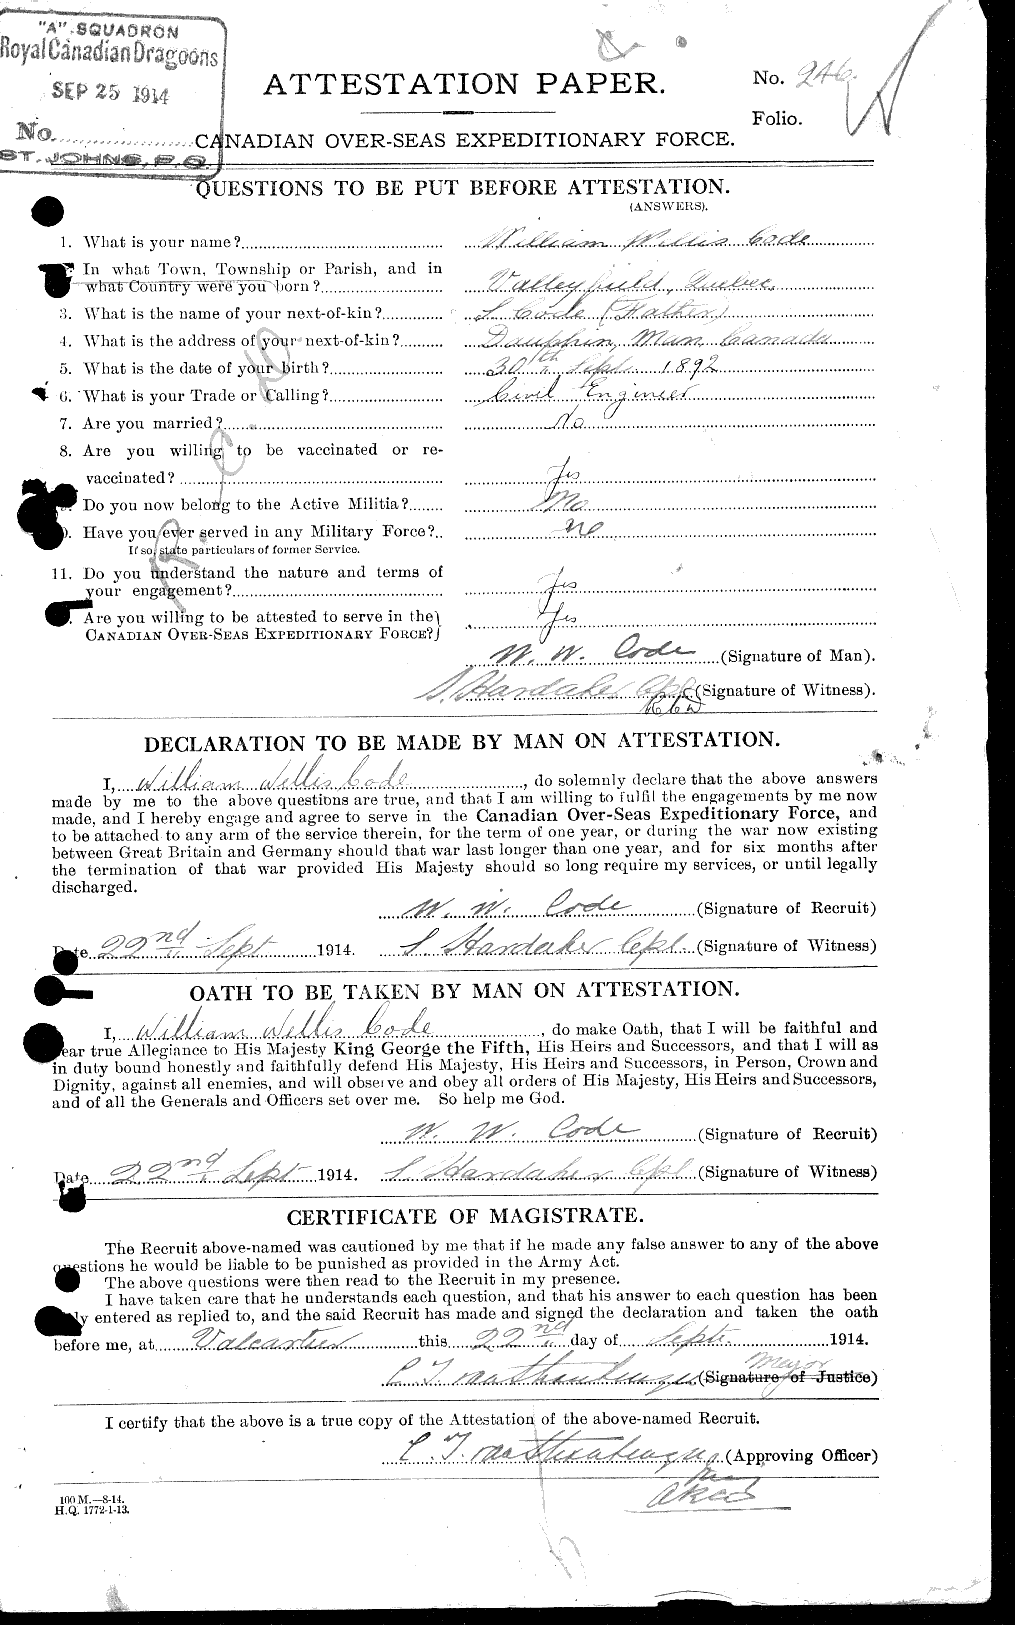 Personnel Records of the First World War - CEF 026840a